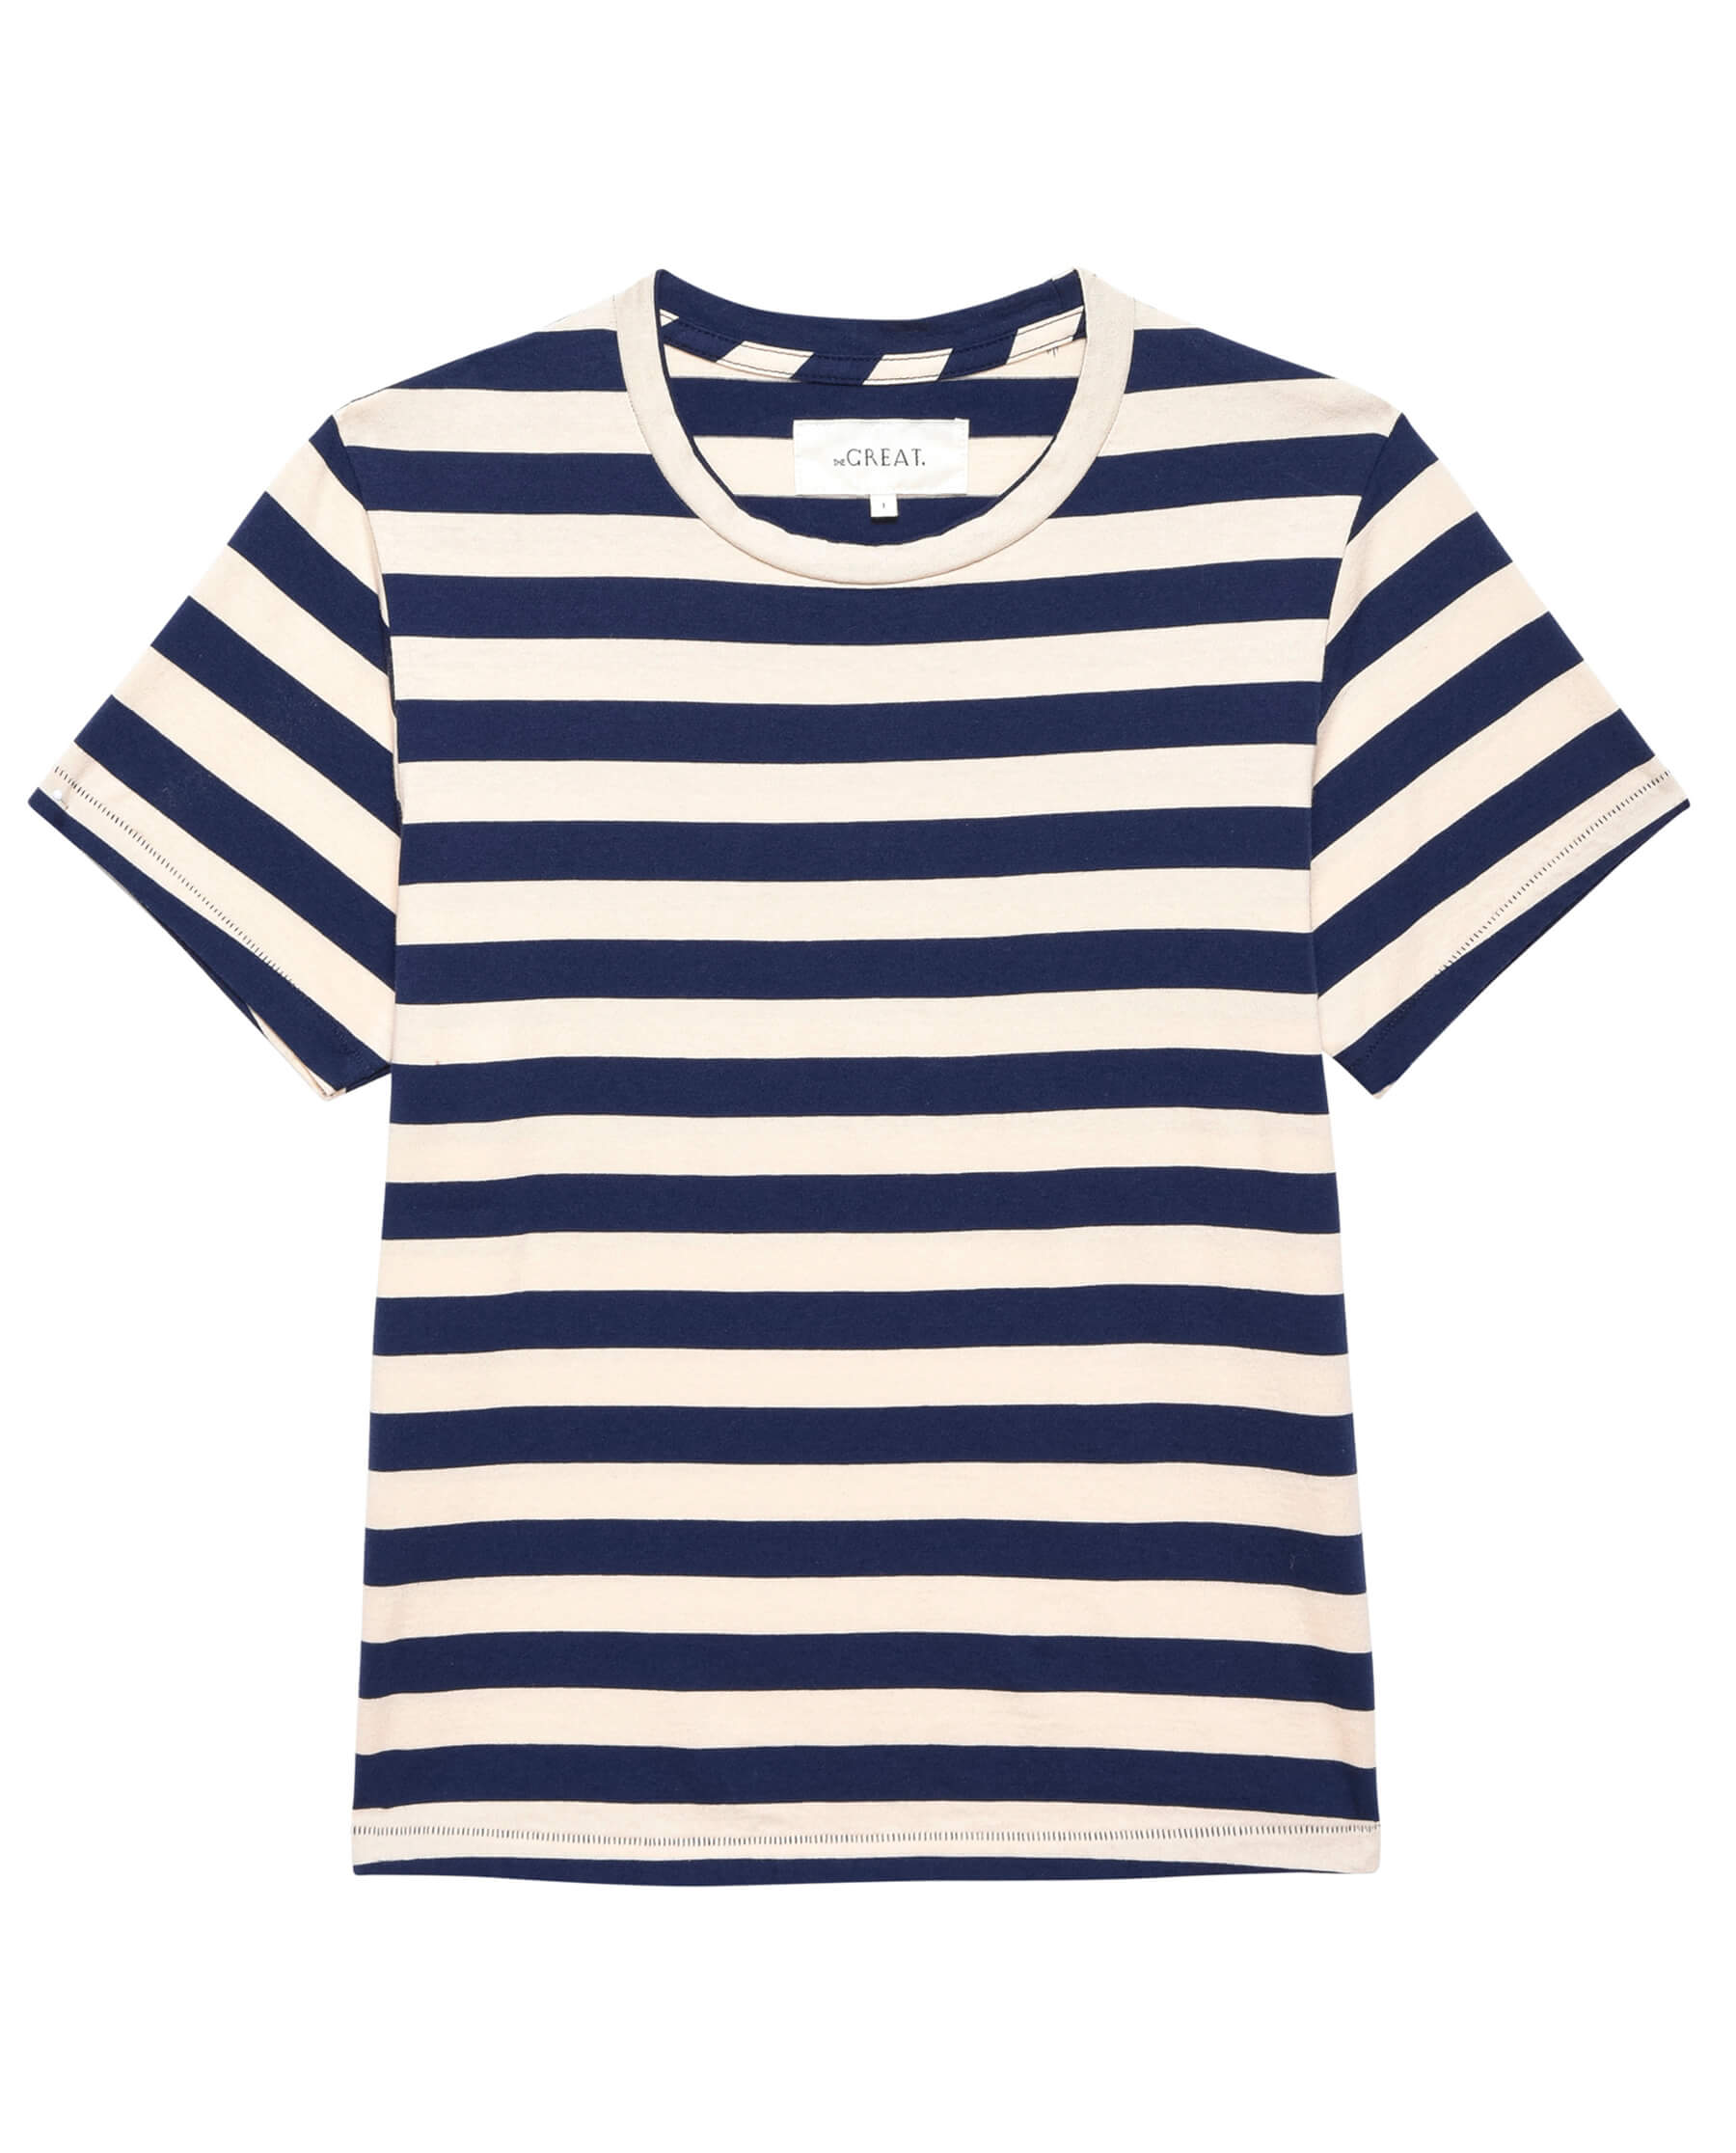 The Little Tee. Novelty -- Navy and Cream Scholar Stripe TEES THE GREAT. PS24 SALE